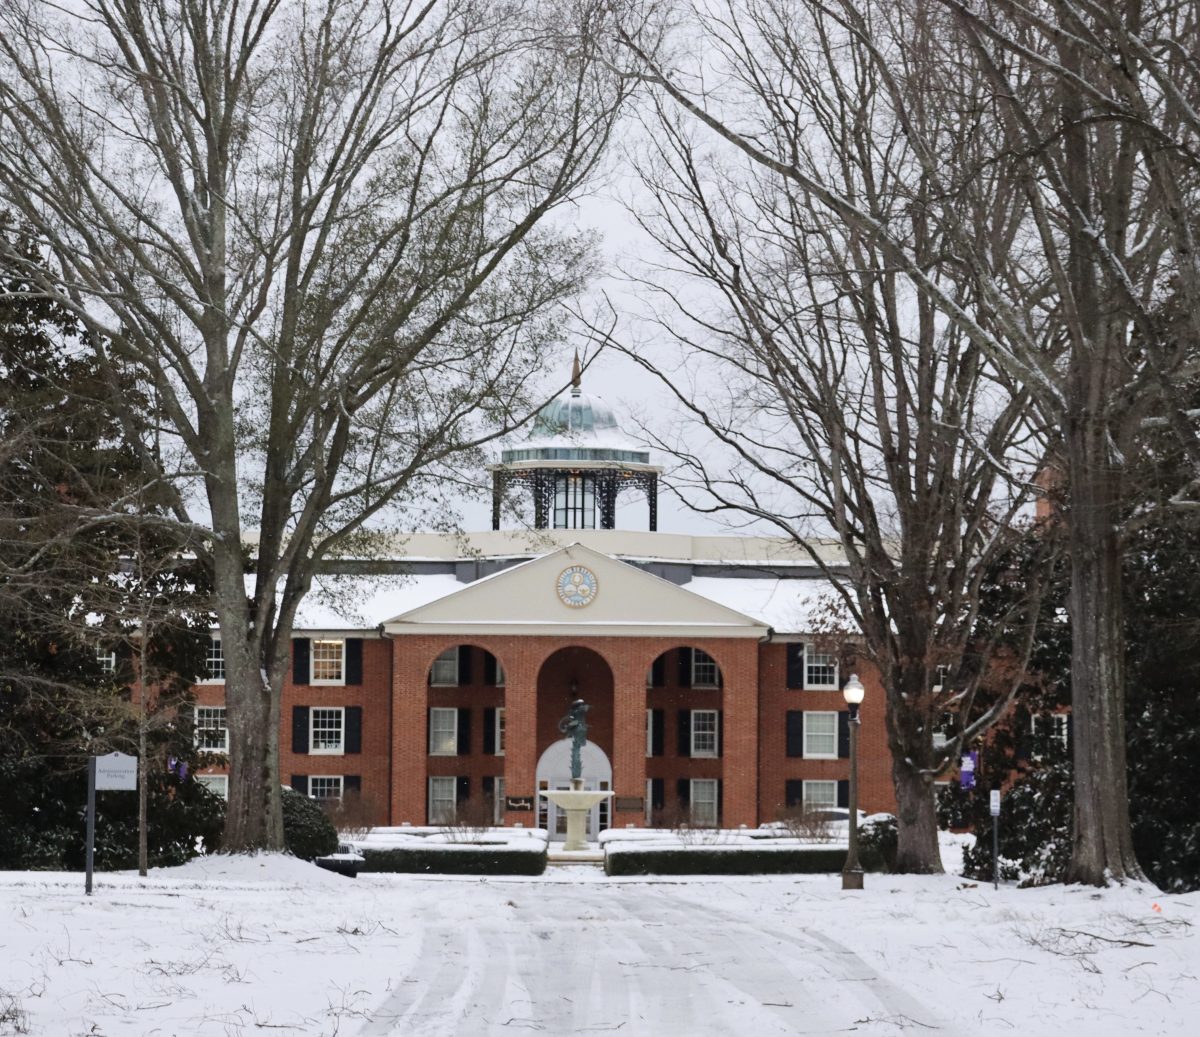 Snow covered campus last Sunday after Winter Storm Izzy delivered several inches of snow. Pictured is the front of Judson Hall, the main entrance to Clark Murphy housing Complex